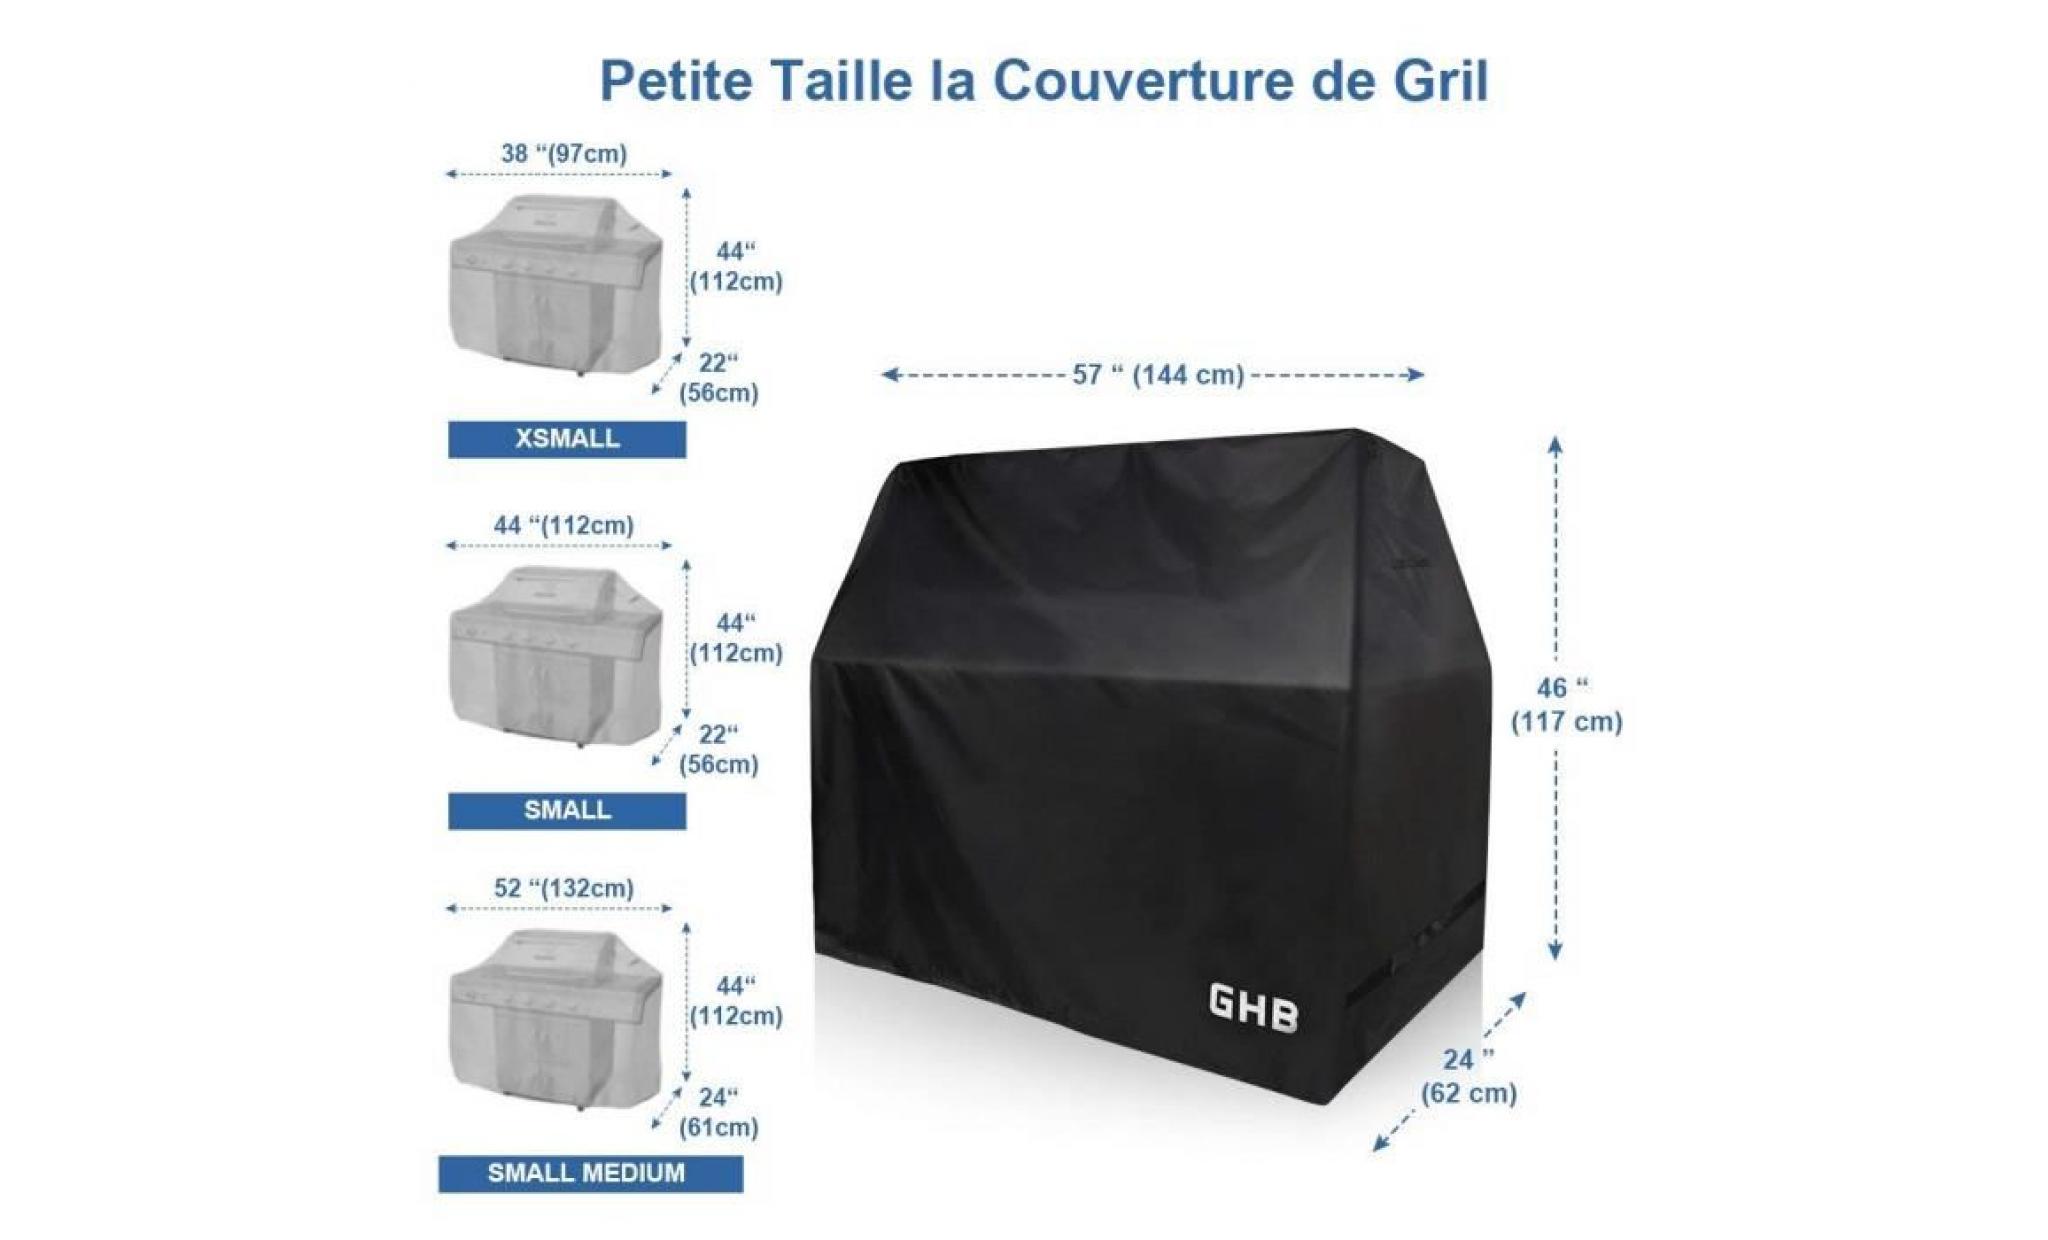 ghb housse barbecue bâche barbecue protection barbecue anti poussière anti uv anti pluie 145 x 61 x 117cm pas cher